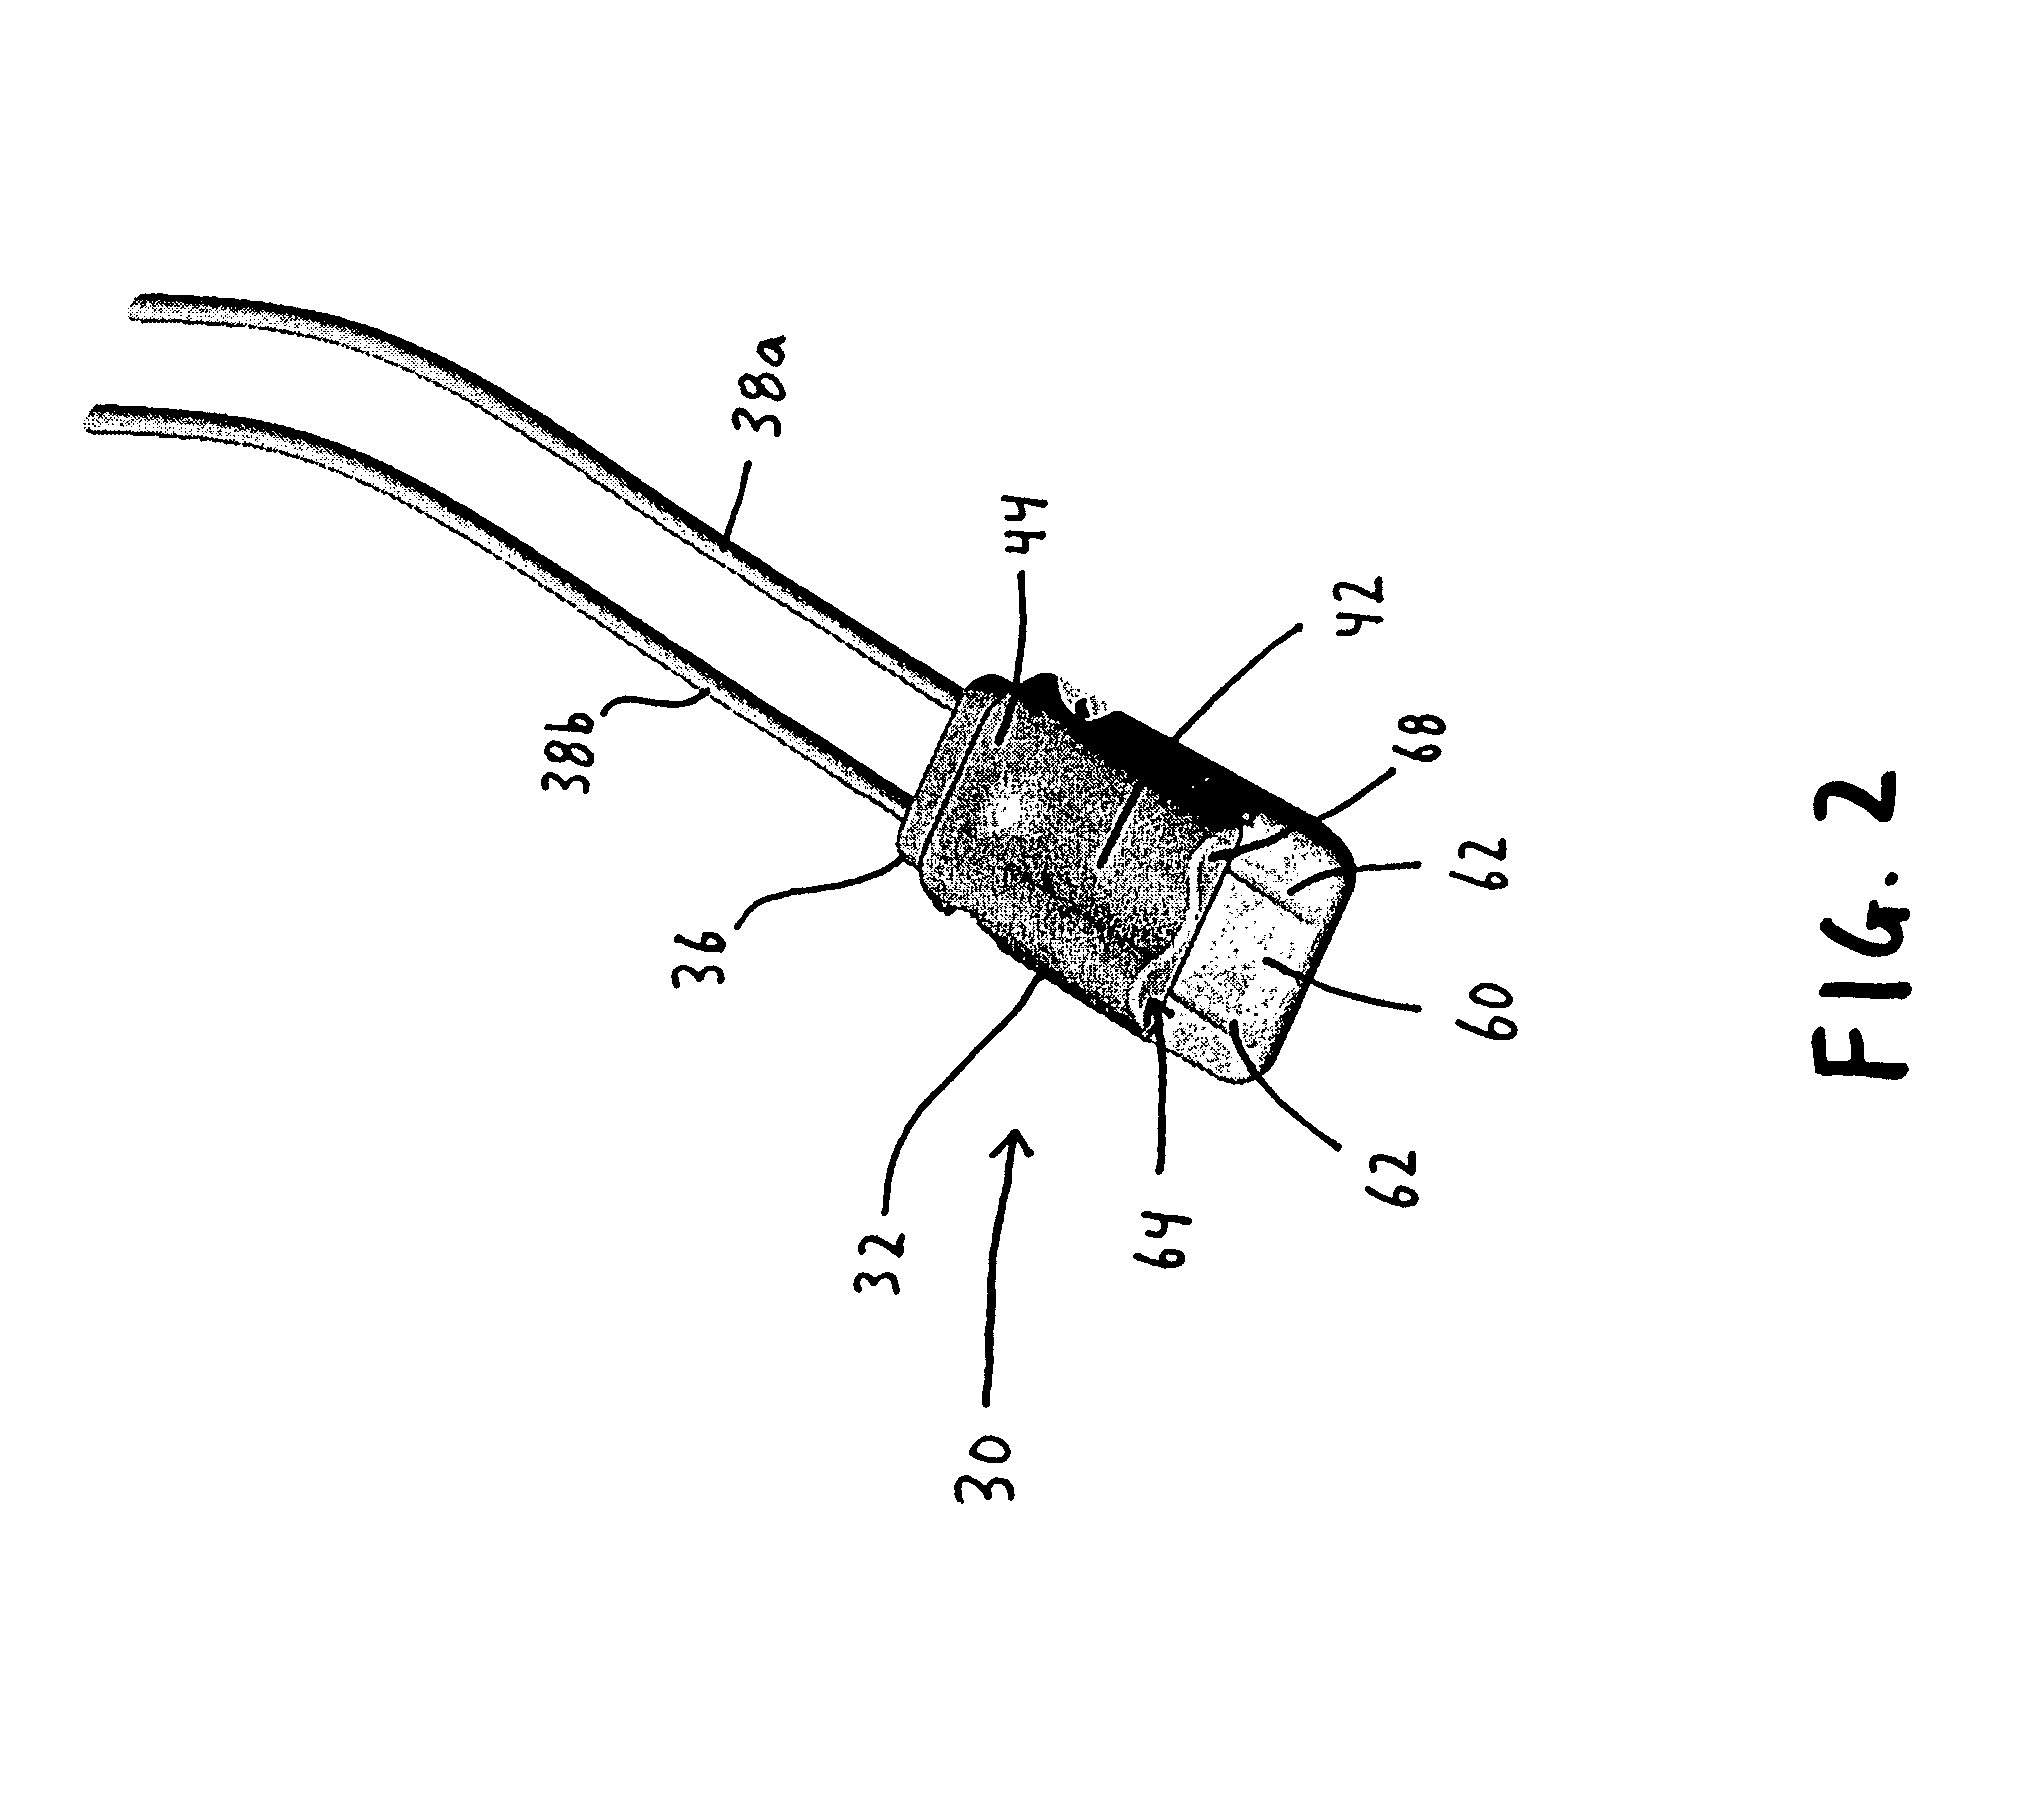 Port device for subcutaneous access to the vascular system of a patient